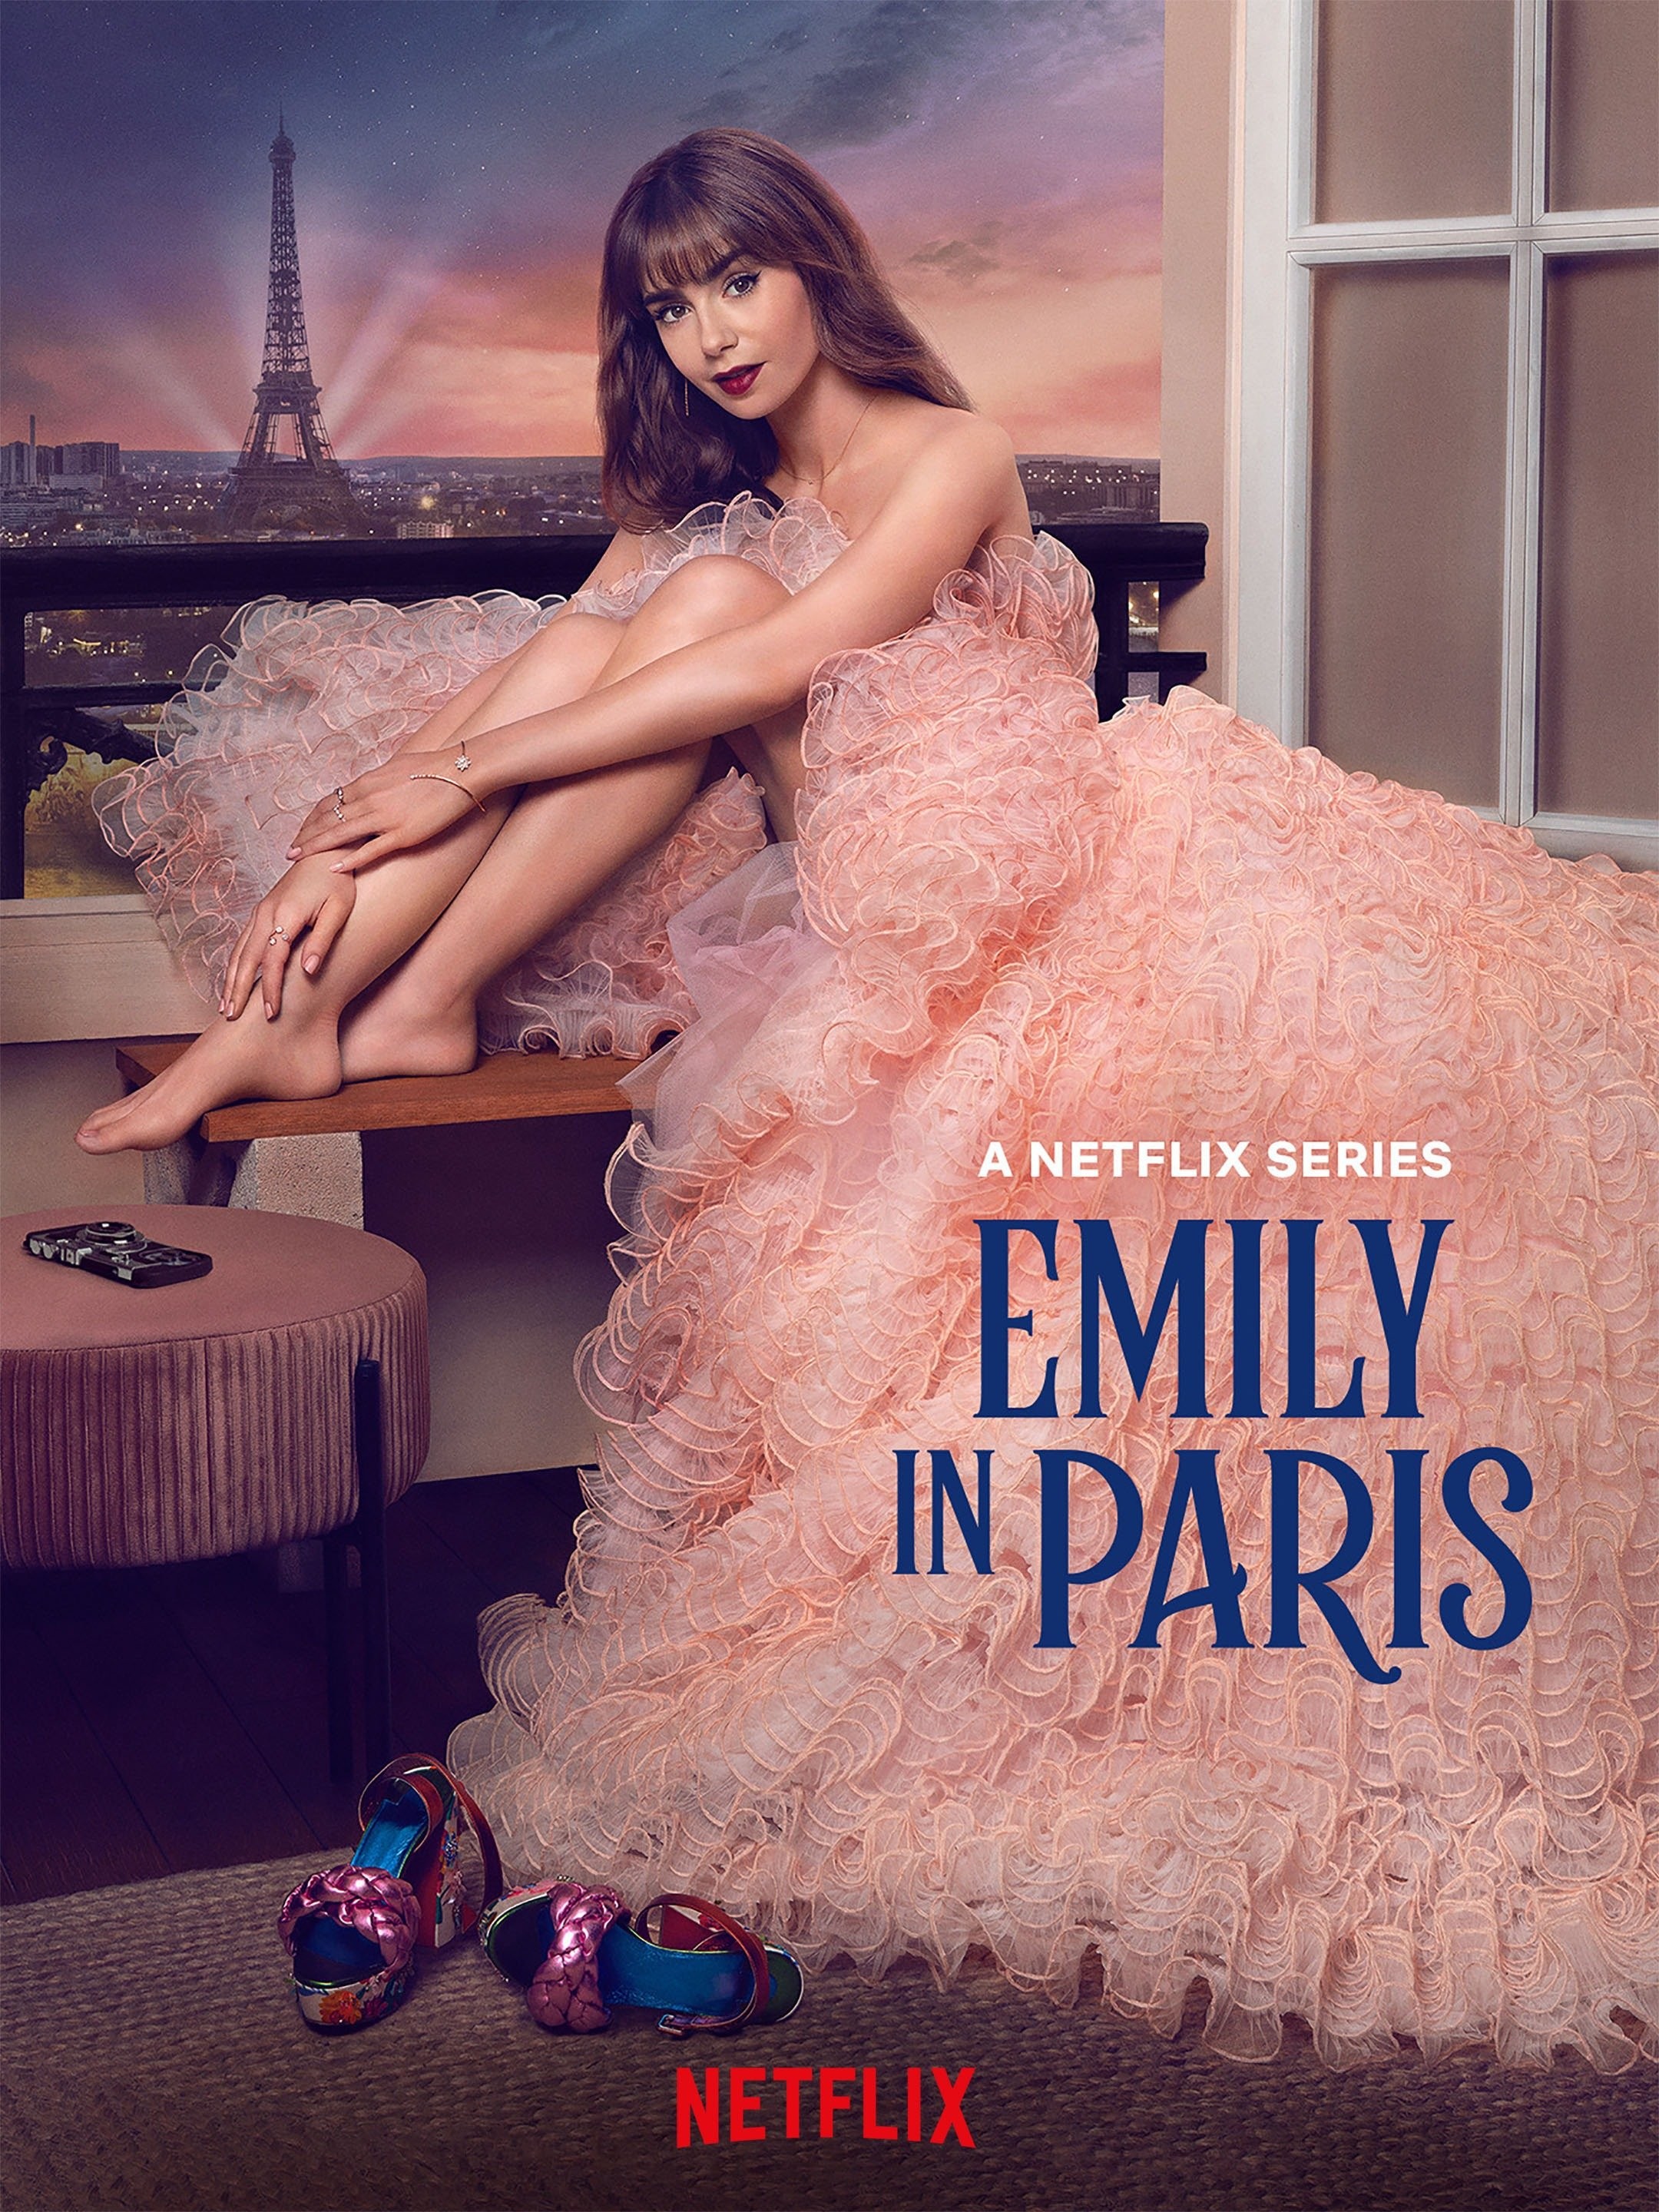 Camille's wardrobe in Emily in Paris is influencing viewers the most